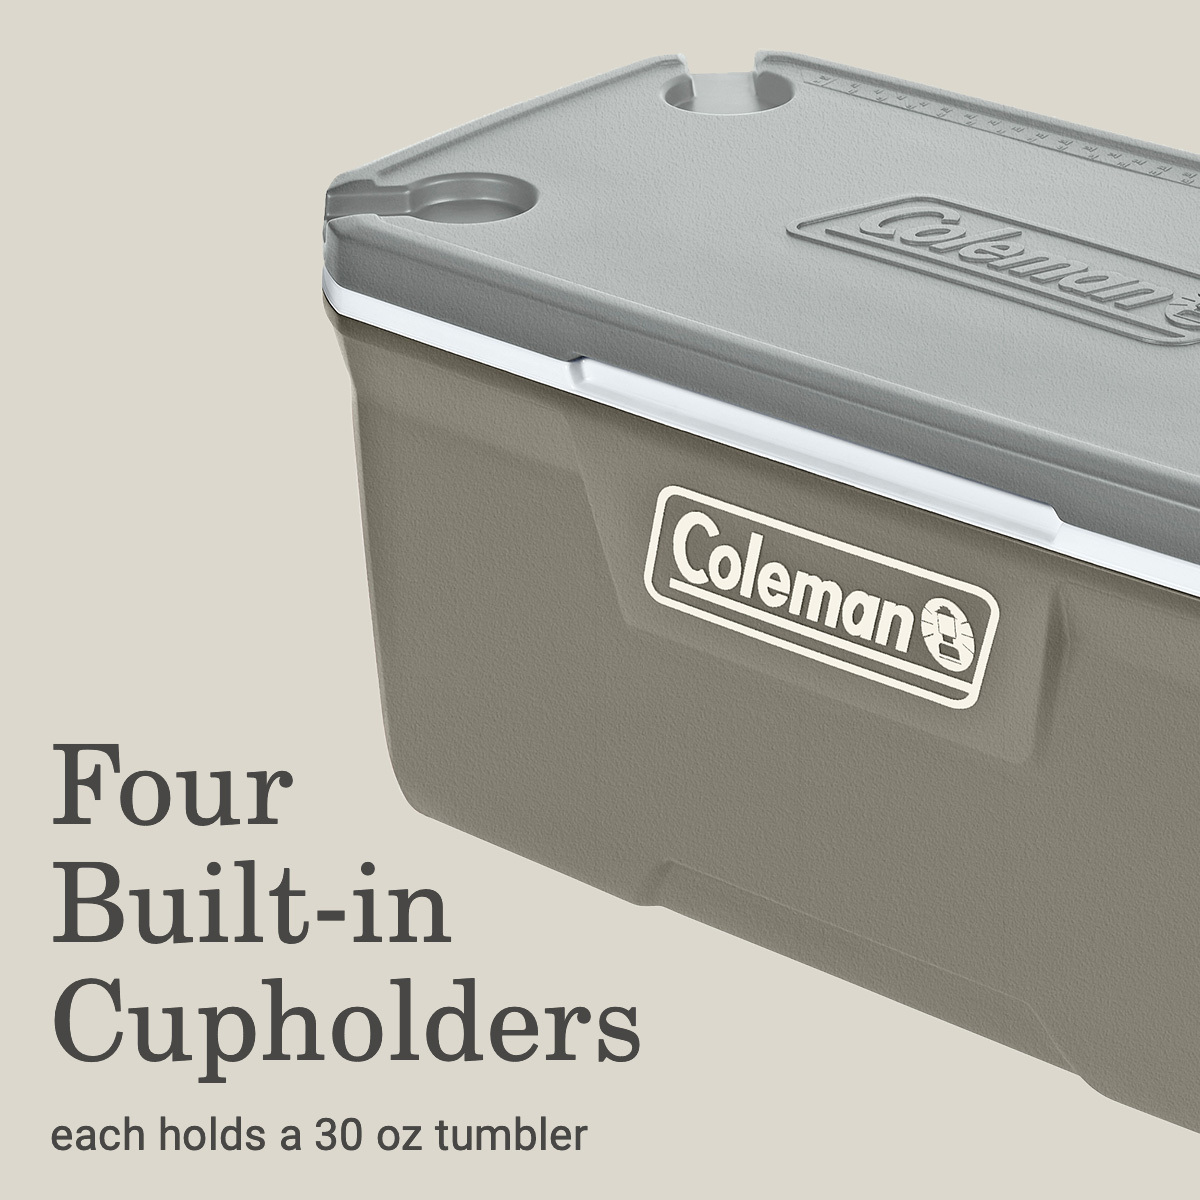 Coleman 316 Series 120QT Hard Chest Cooler, Silver Ash - image 5 of 9